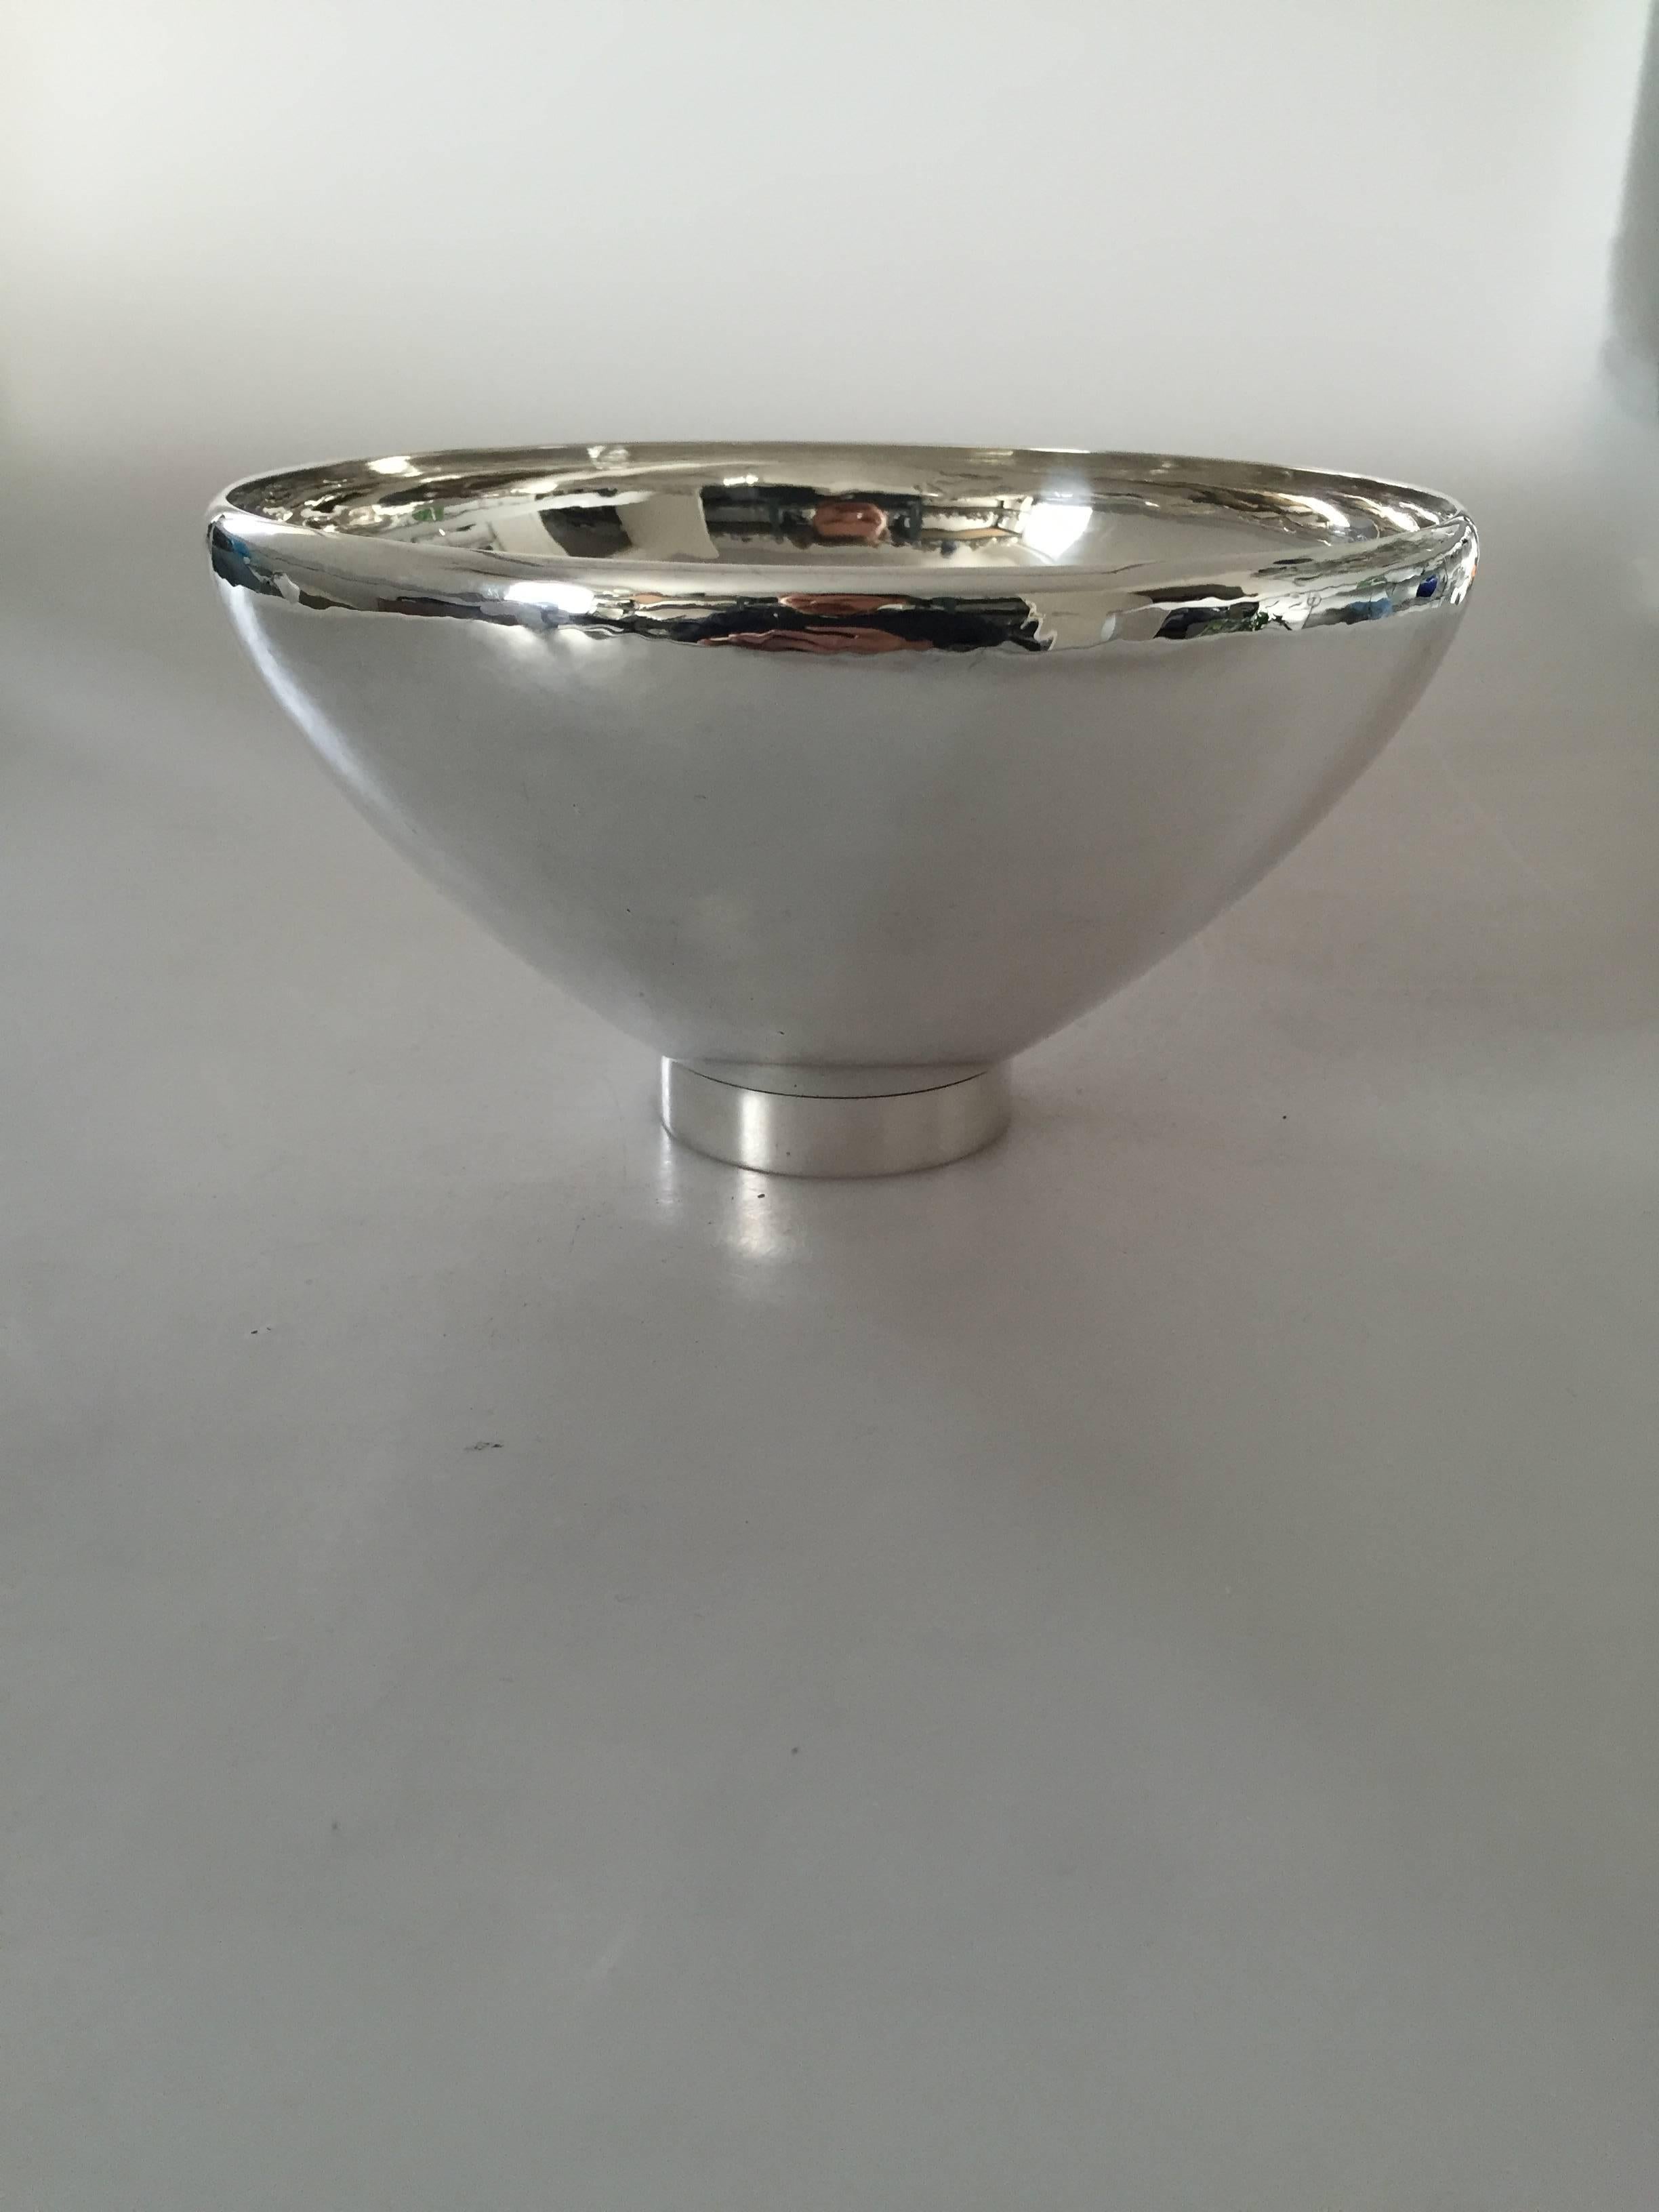 Georg Jensen sterling silver bowl #484B. 

Measures 10.5 cm tall x 19 cm diameter.

Georg Jensen (1866-1935) opened his small silver atelier in Copenhagen, Denmark in 1904. By 1935 the year of his death, he had received world acclaim and was